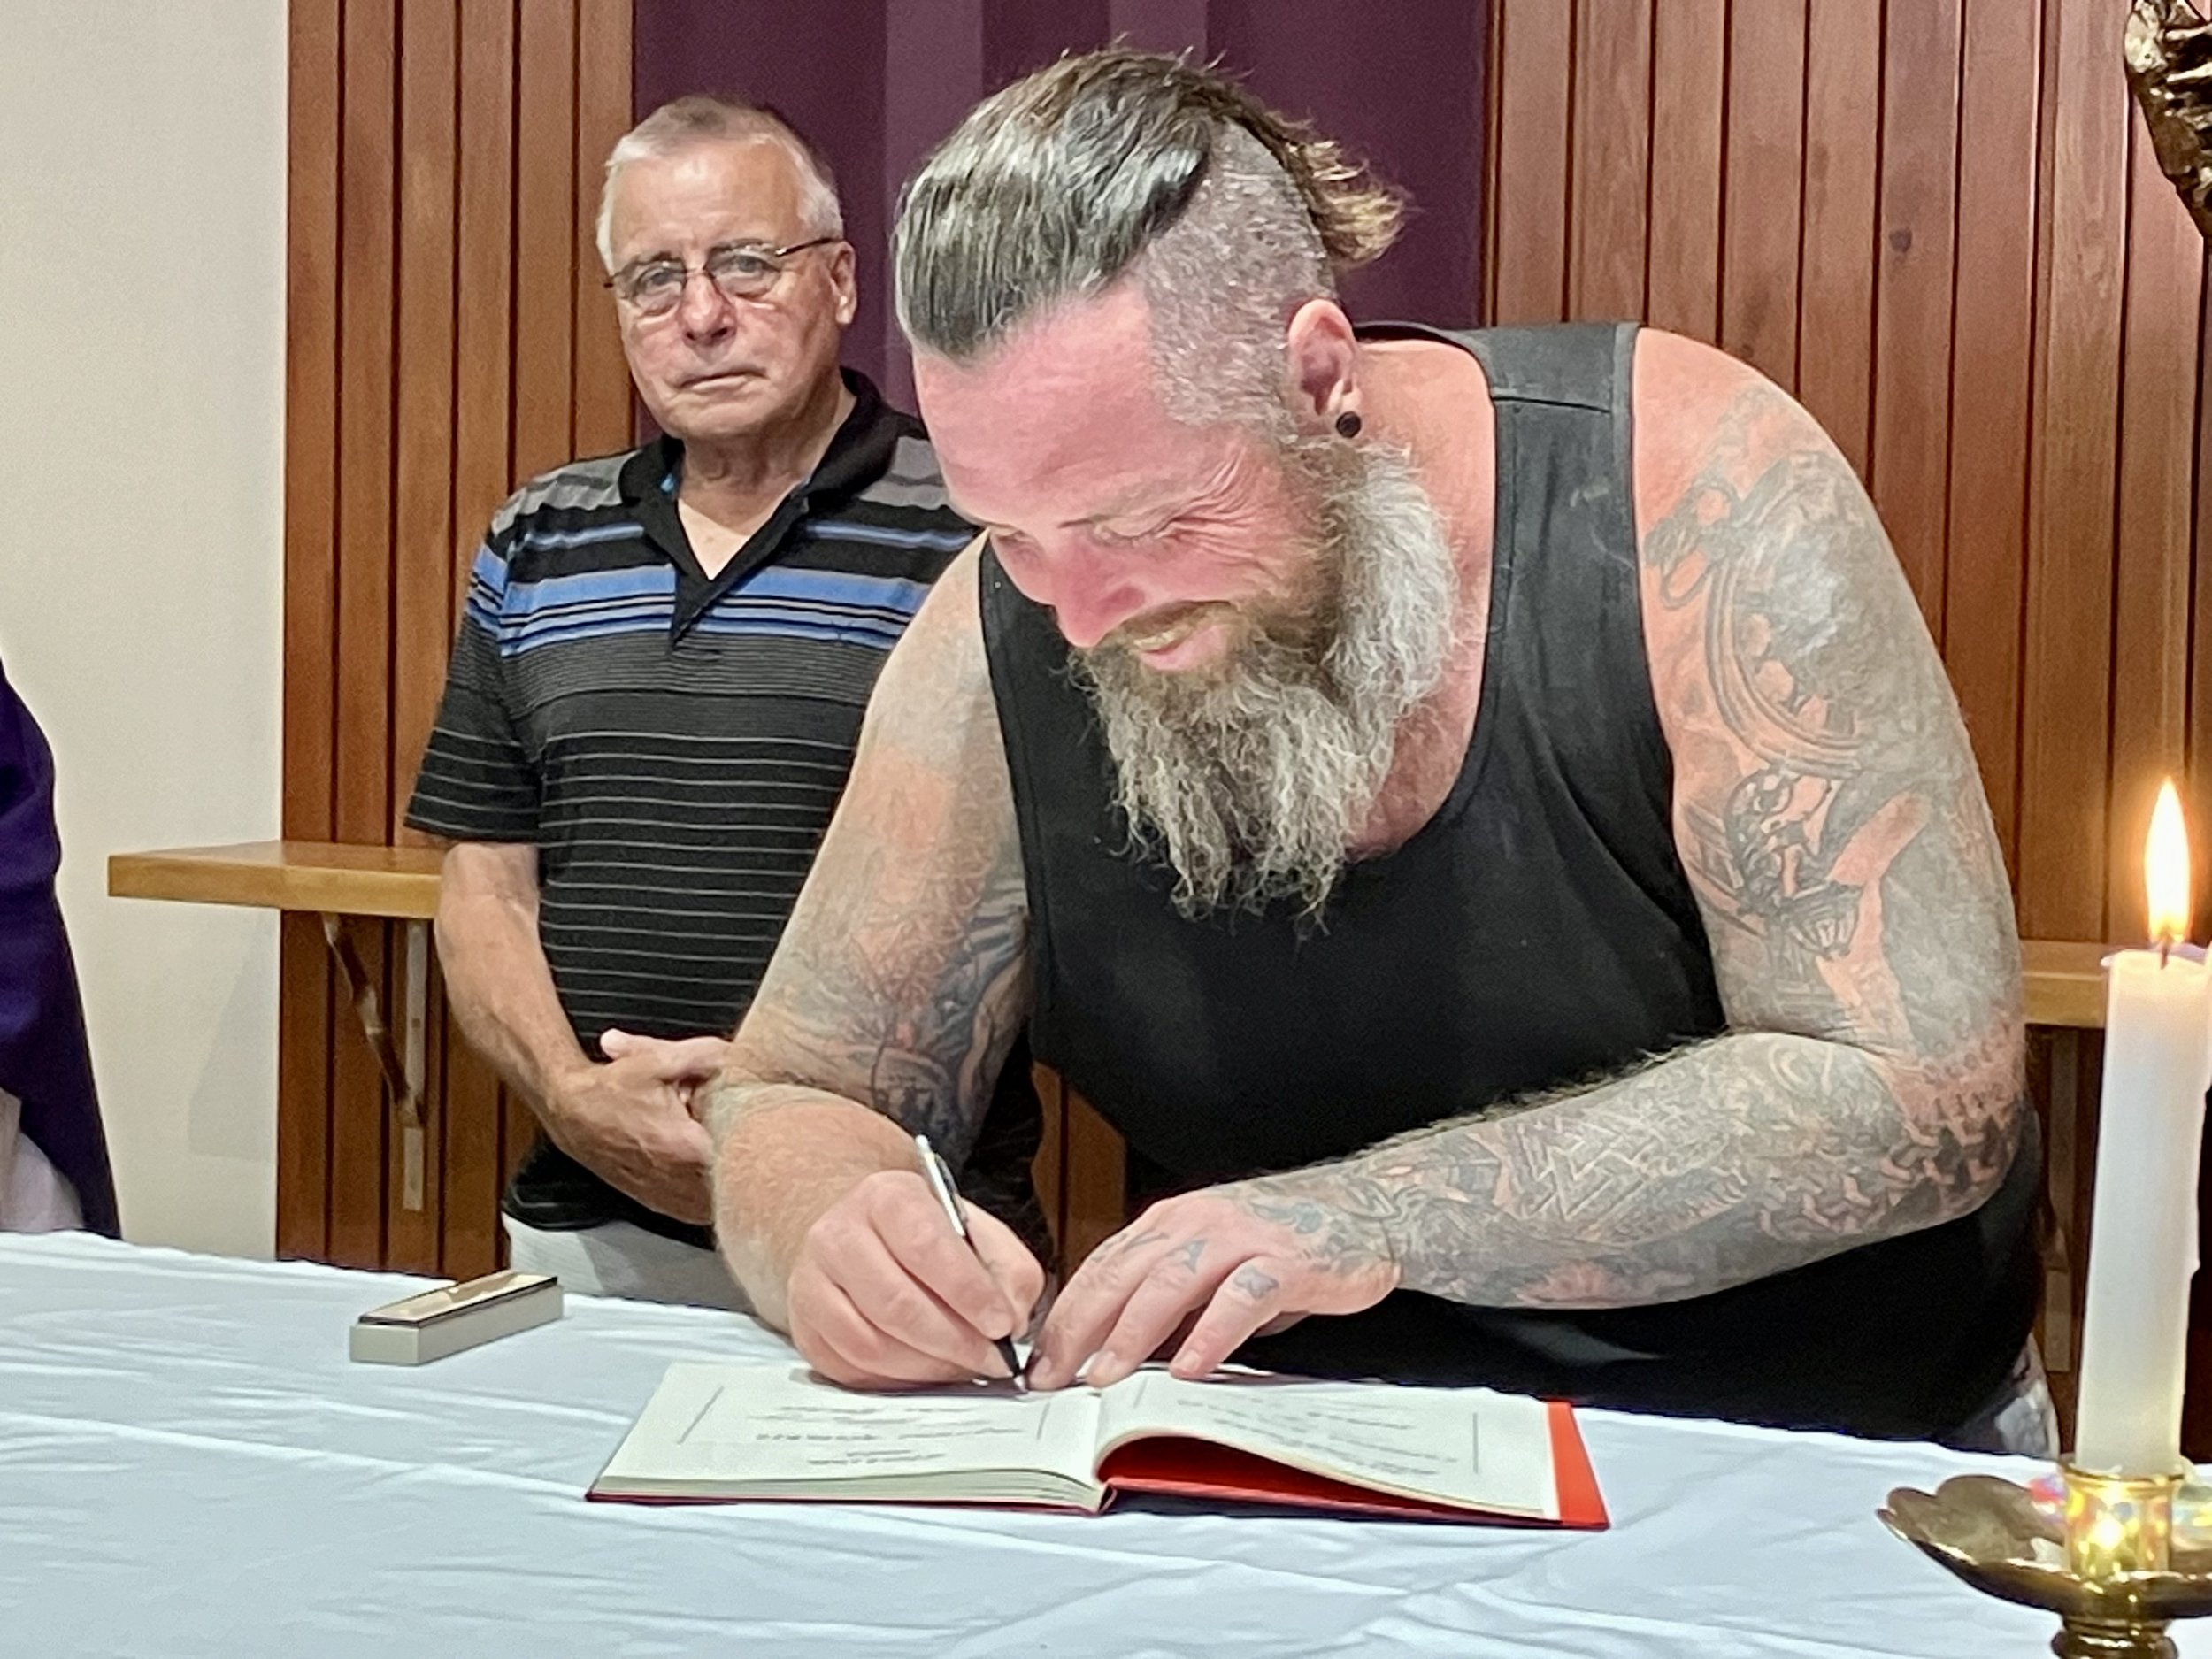 Luke signing the Book of the Elect